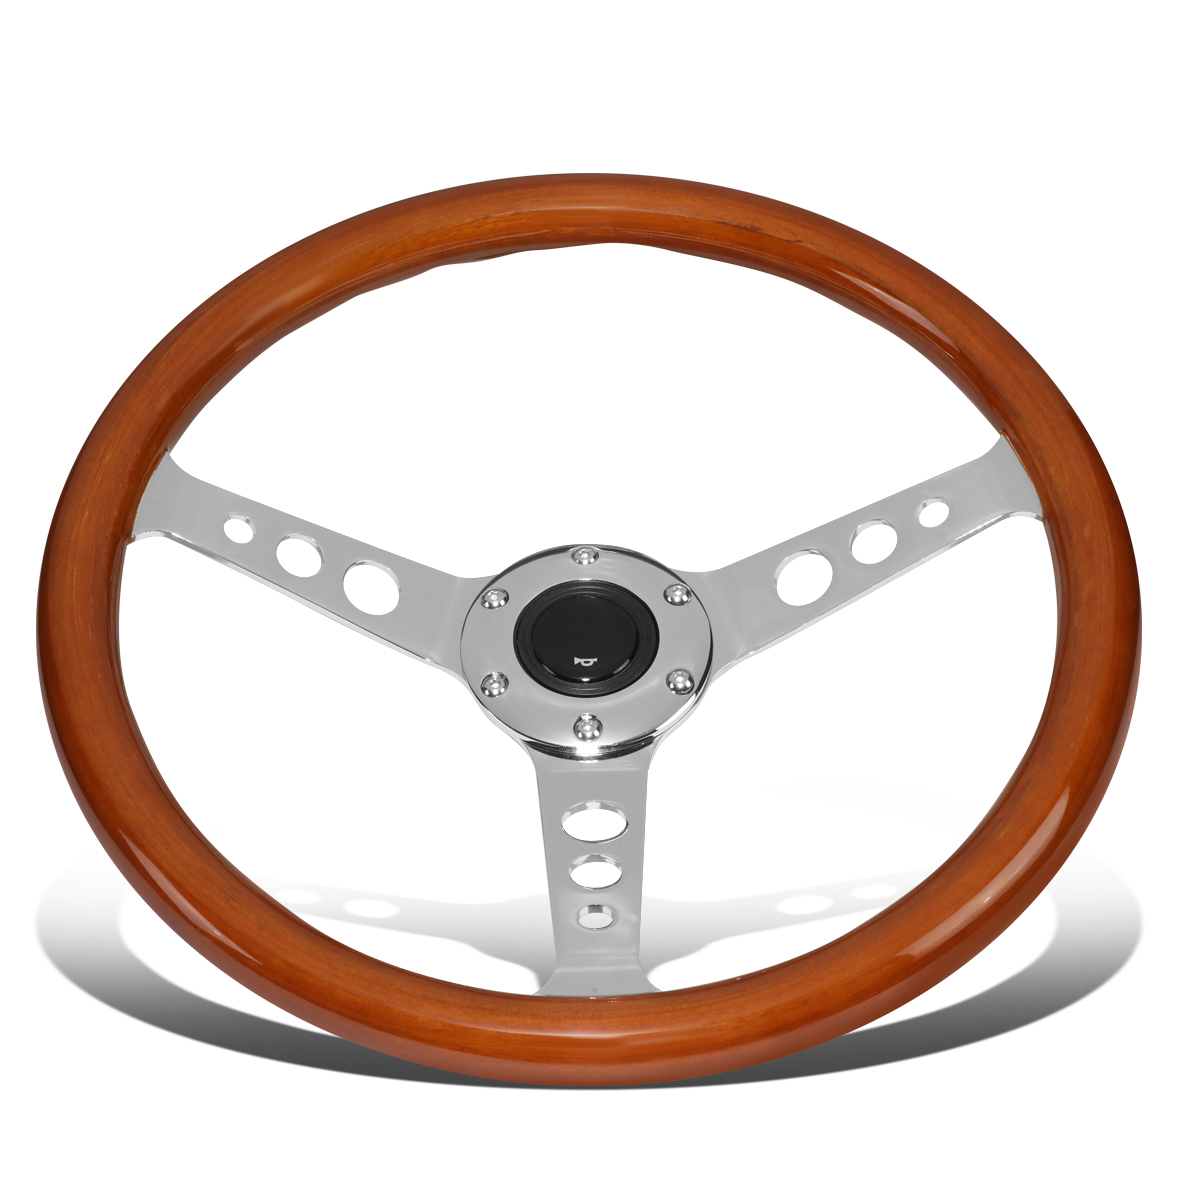 DNA Motoring SW1406 14" Wood Grain Grip 2" Deep Dish Stainless Steel 3 Spokes Vintage Design Steering Wheel with Horn Button